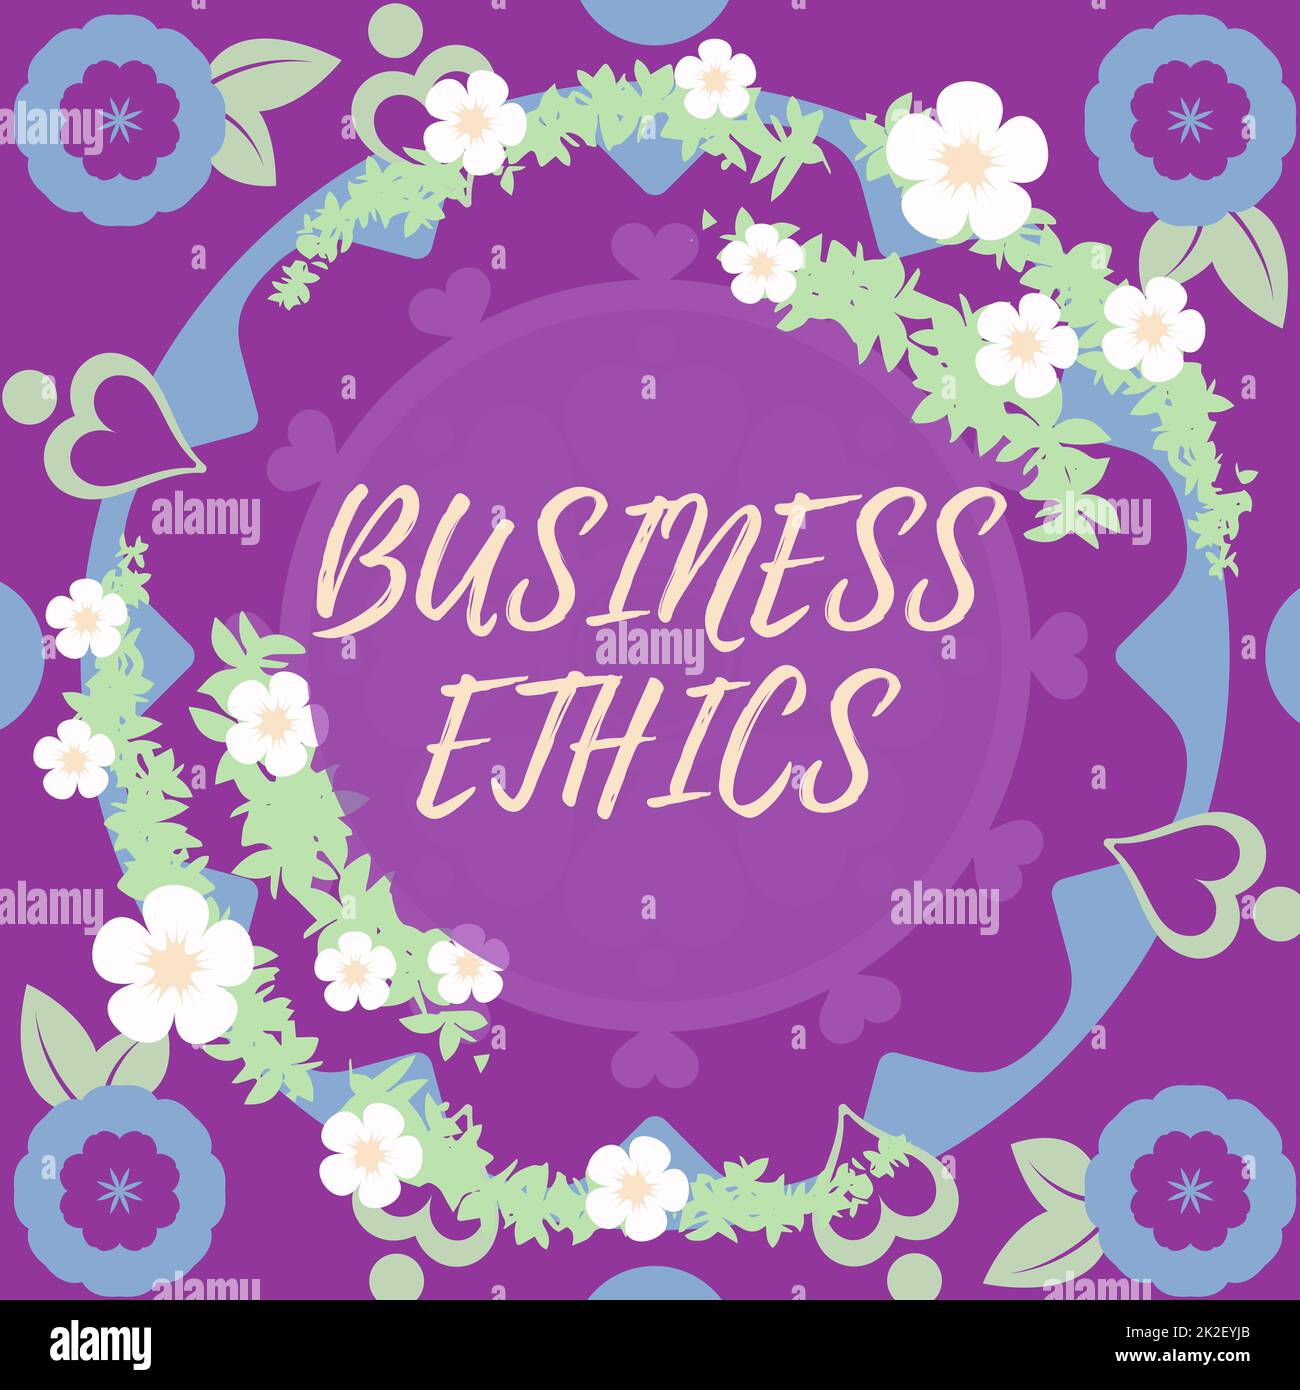 Sign displaying Business Ethics. Business idea Moral principles that guide the way a business behaves Blank Frame Decorated With Abstract Modernized Forms Flowers And Foliage. Stock Photo